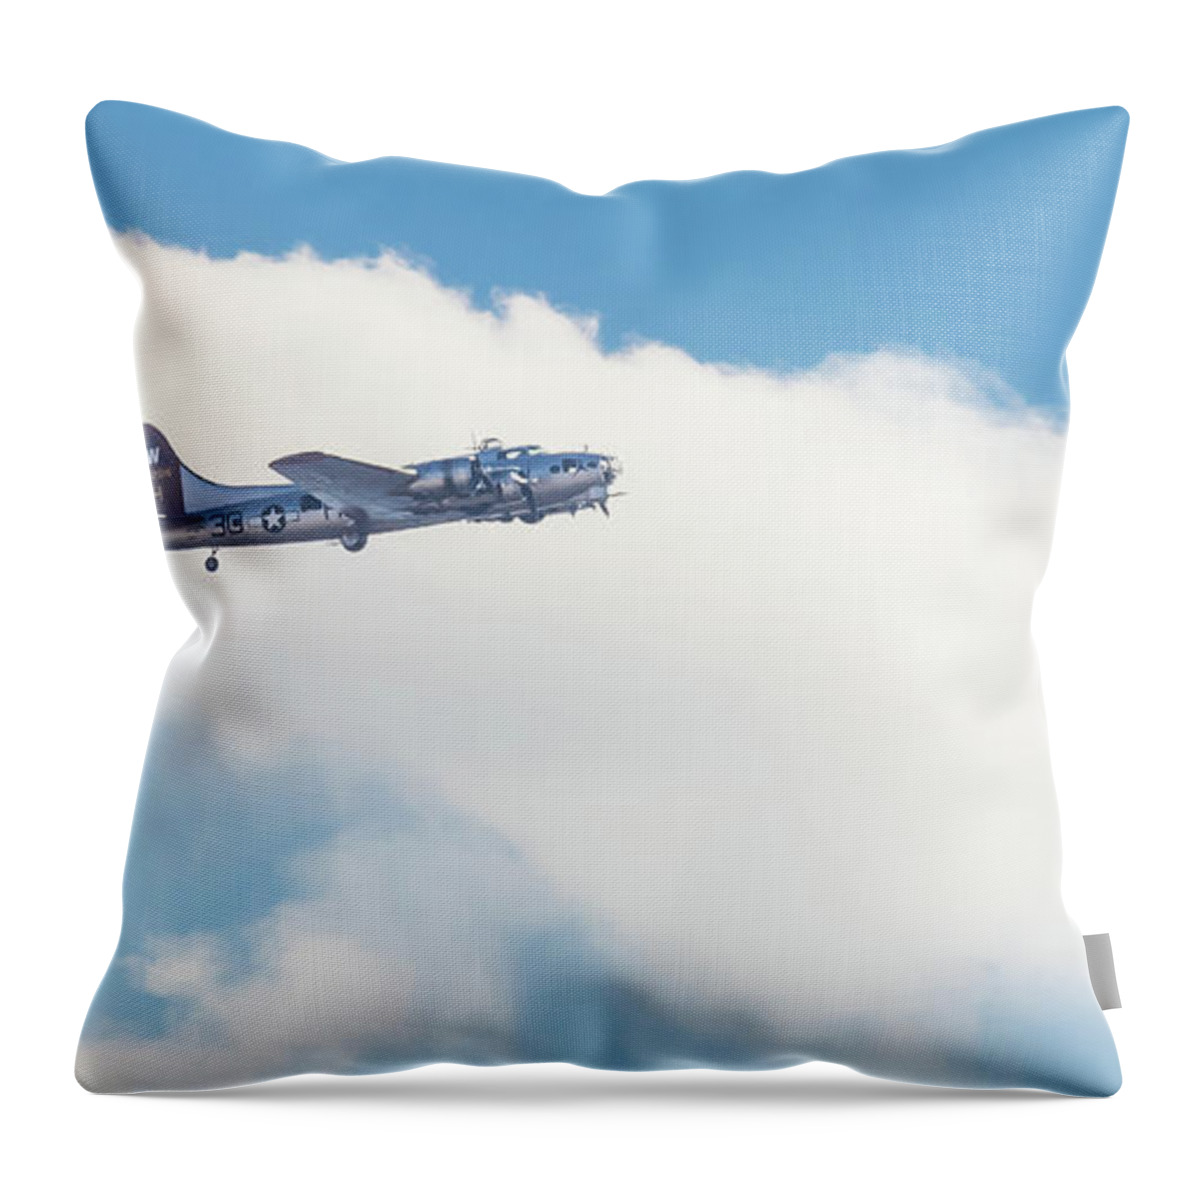 B17 Flying Fortress Throw Pillow featuring the photograph B17 Flying Fortress by Robert Bellomy